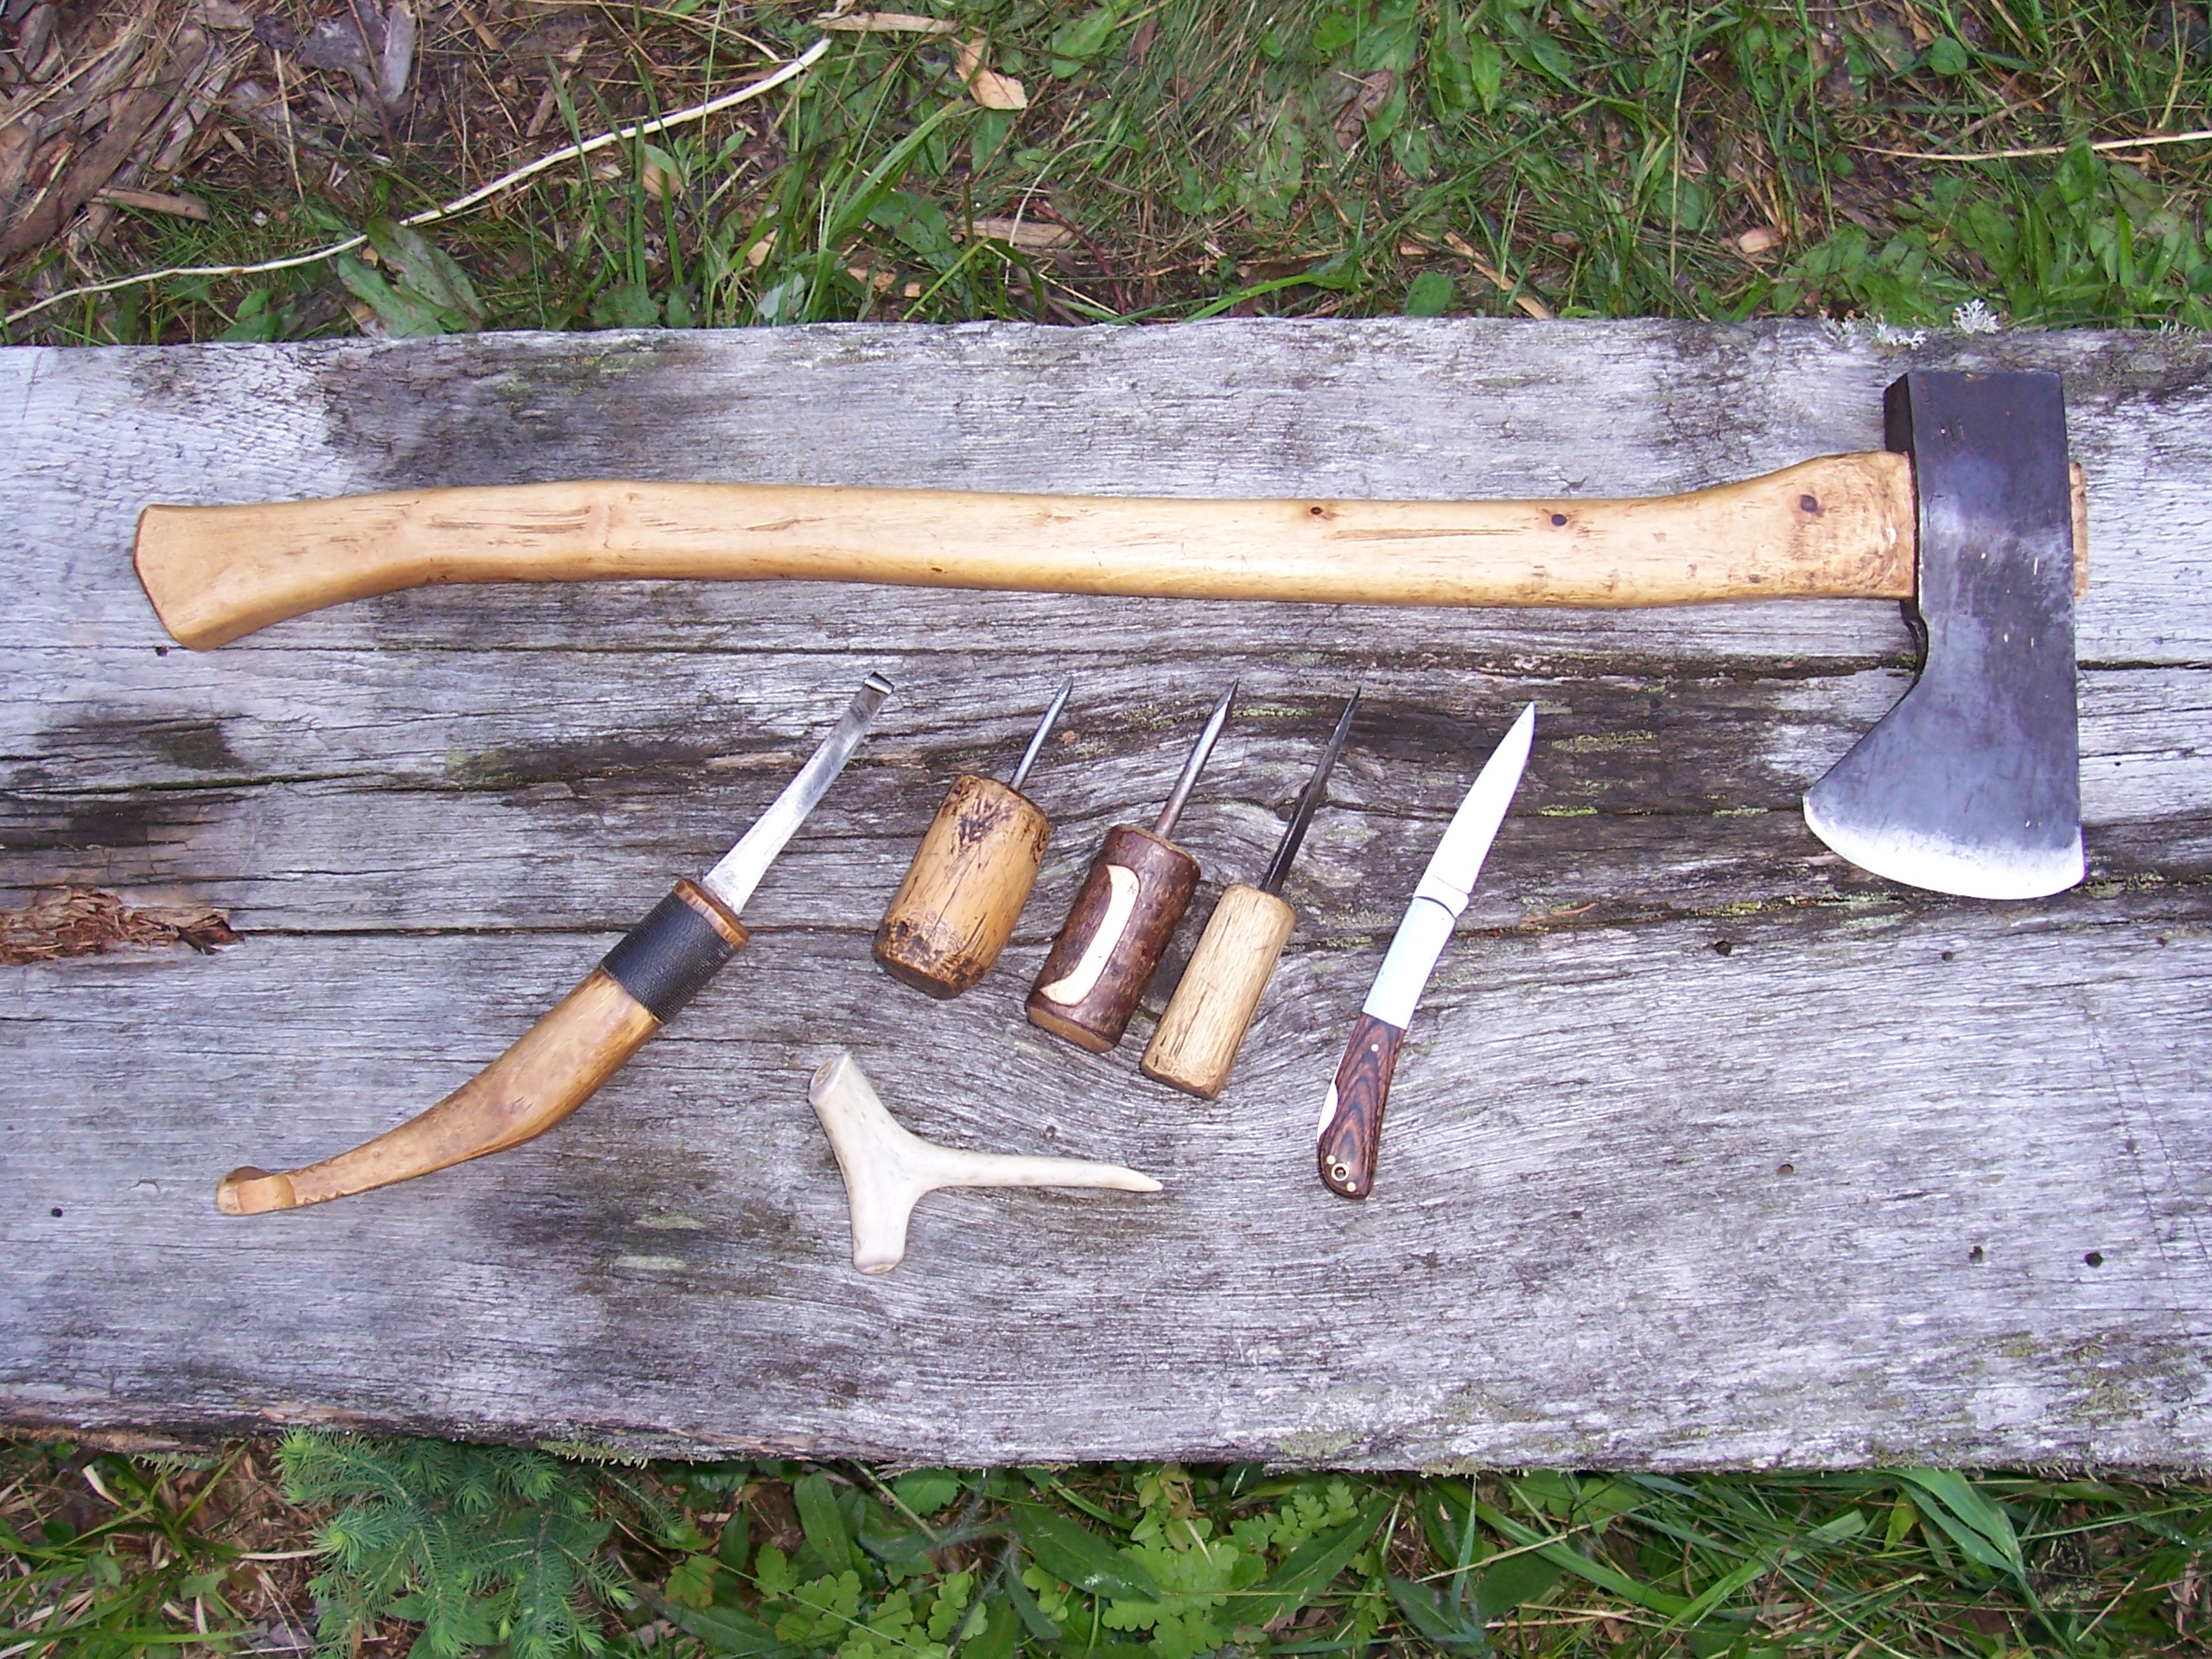 The basic tools include the axe, crooked knife, jack knife and a 